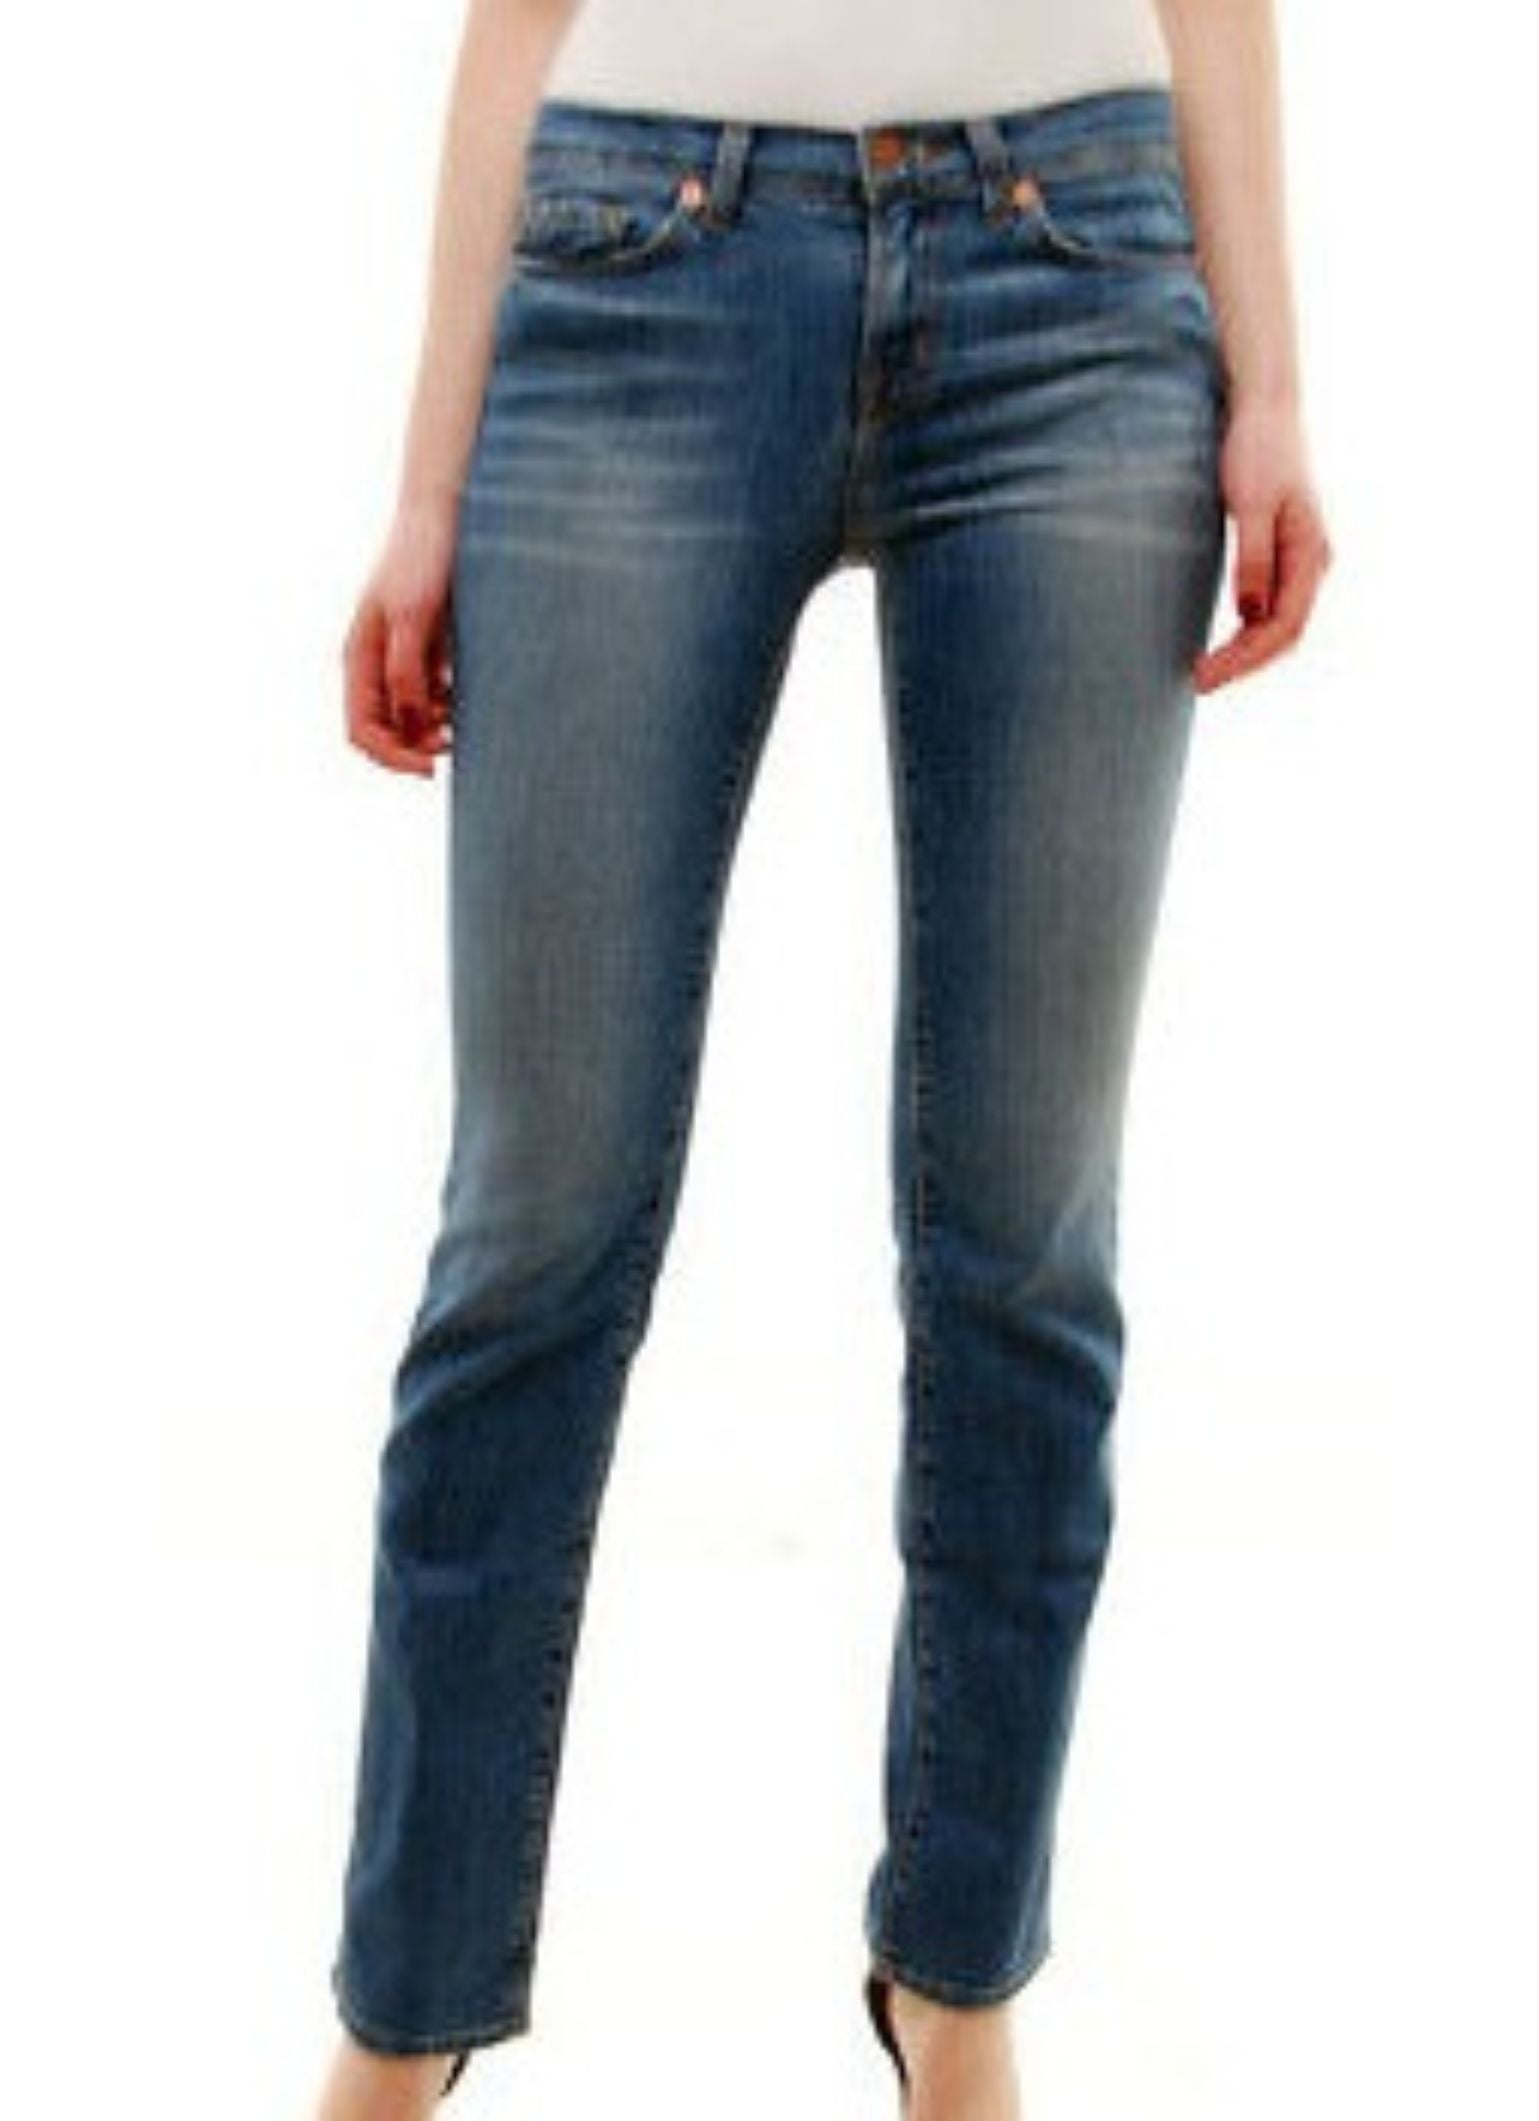 J Brand Skinny Bliss Jeans - Second Chance